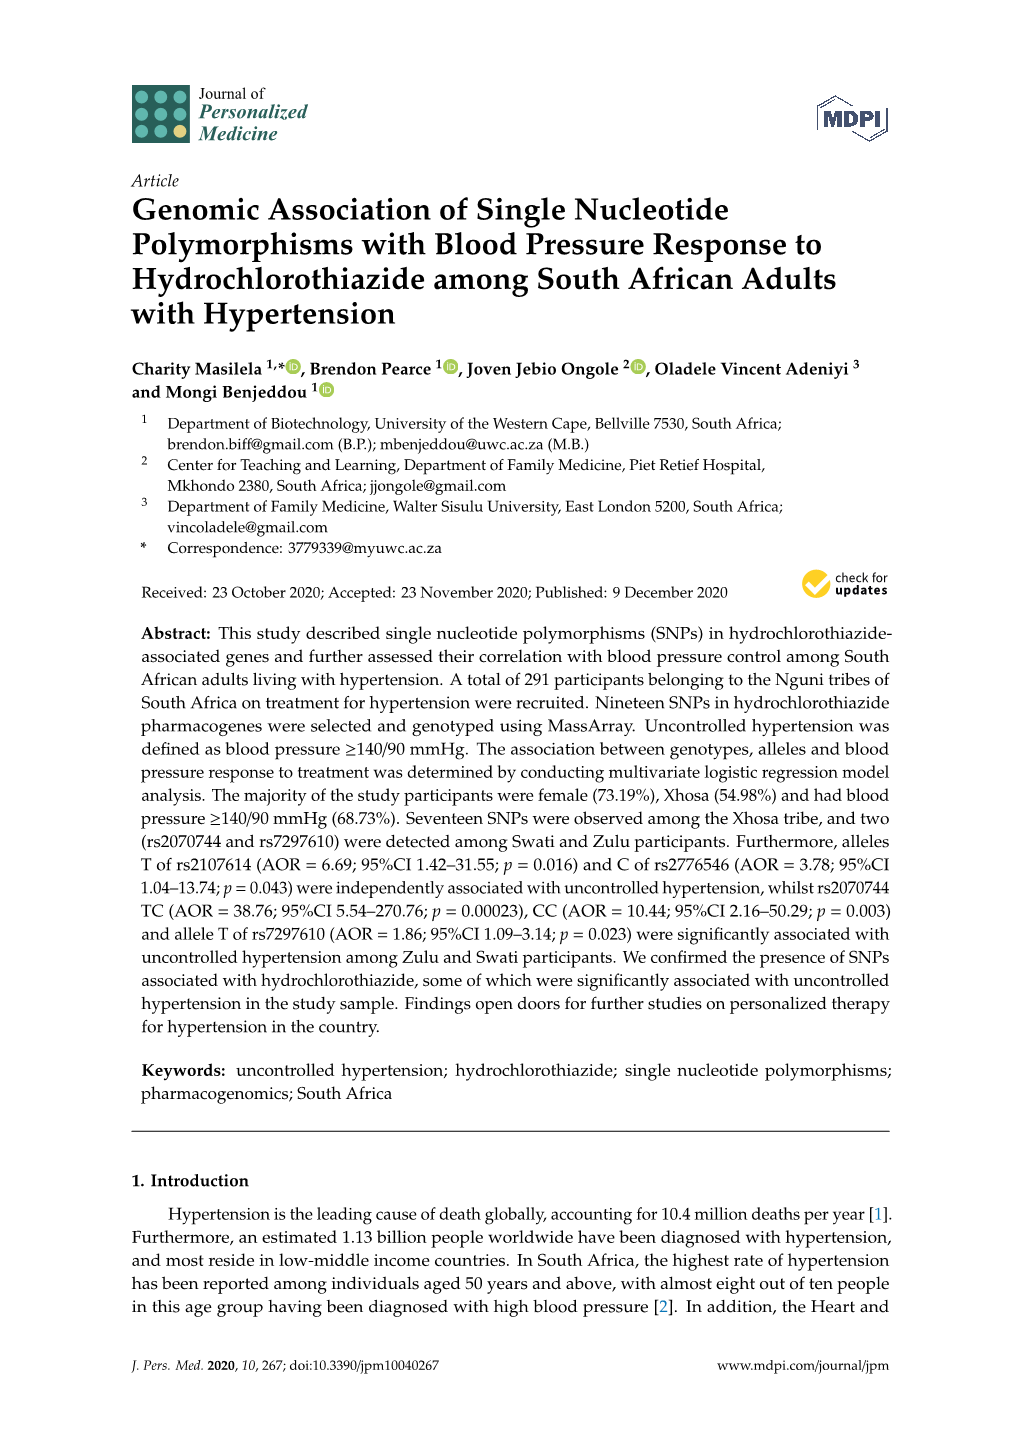 Genomic Association of Single Nucleotide Polymorphisms with Blood Pressure Response to Hydrochlorothiazide Among South African Adults with Hypertension